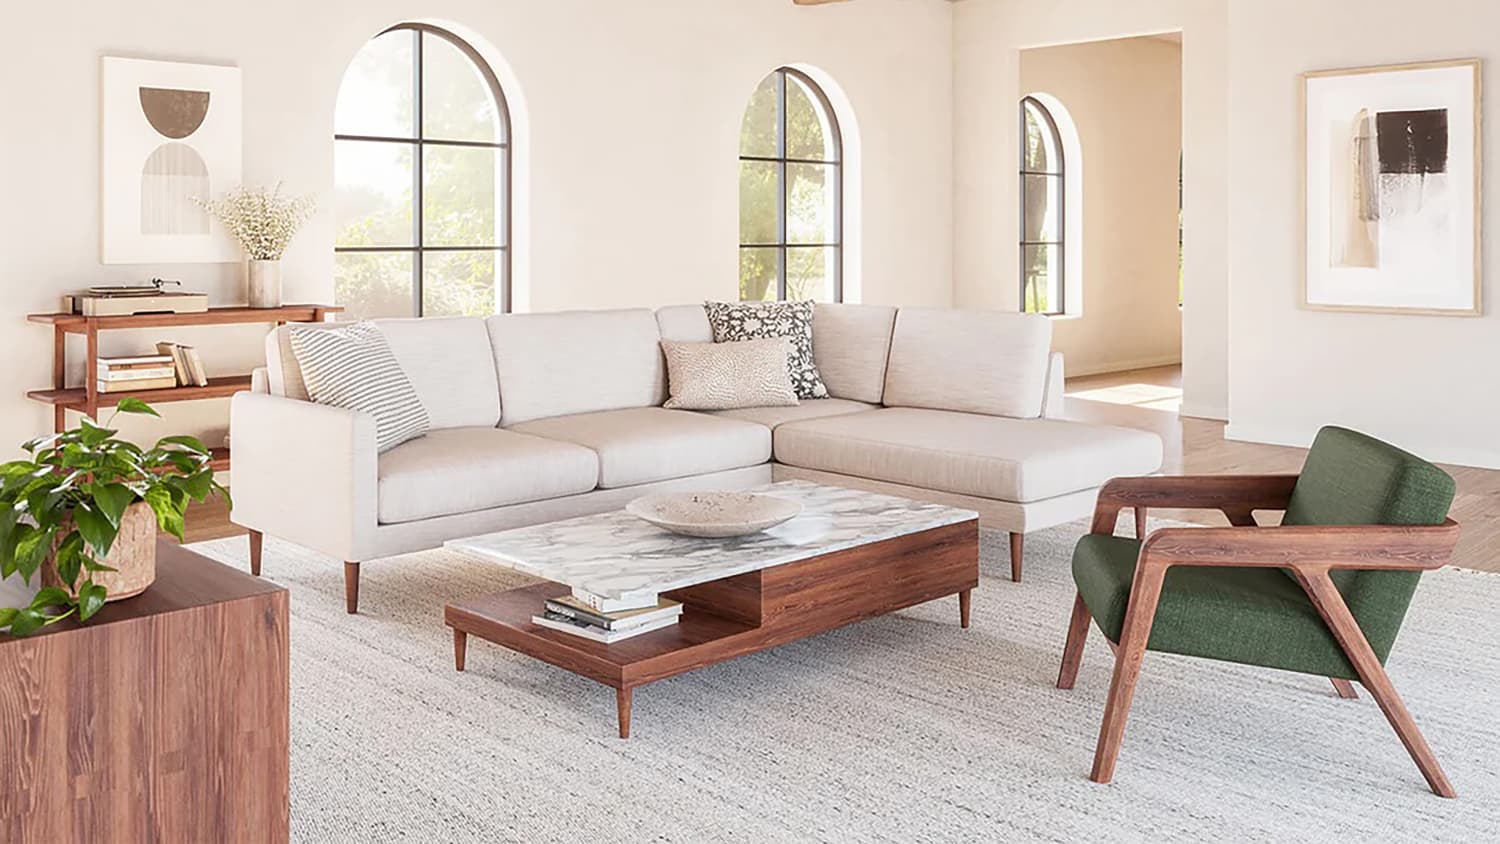 A contemporary living room with a light cream sectional sofa, a green armchair, and a marble-top wooden coffee table. Large arched windows and minimalistic decor, including potted plants and abstract artwork, enhance the airy and modern aesthetic.